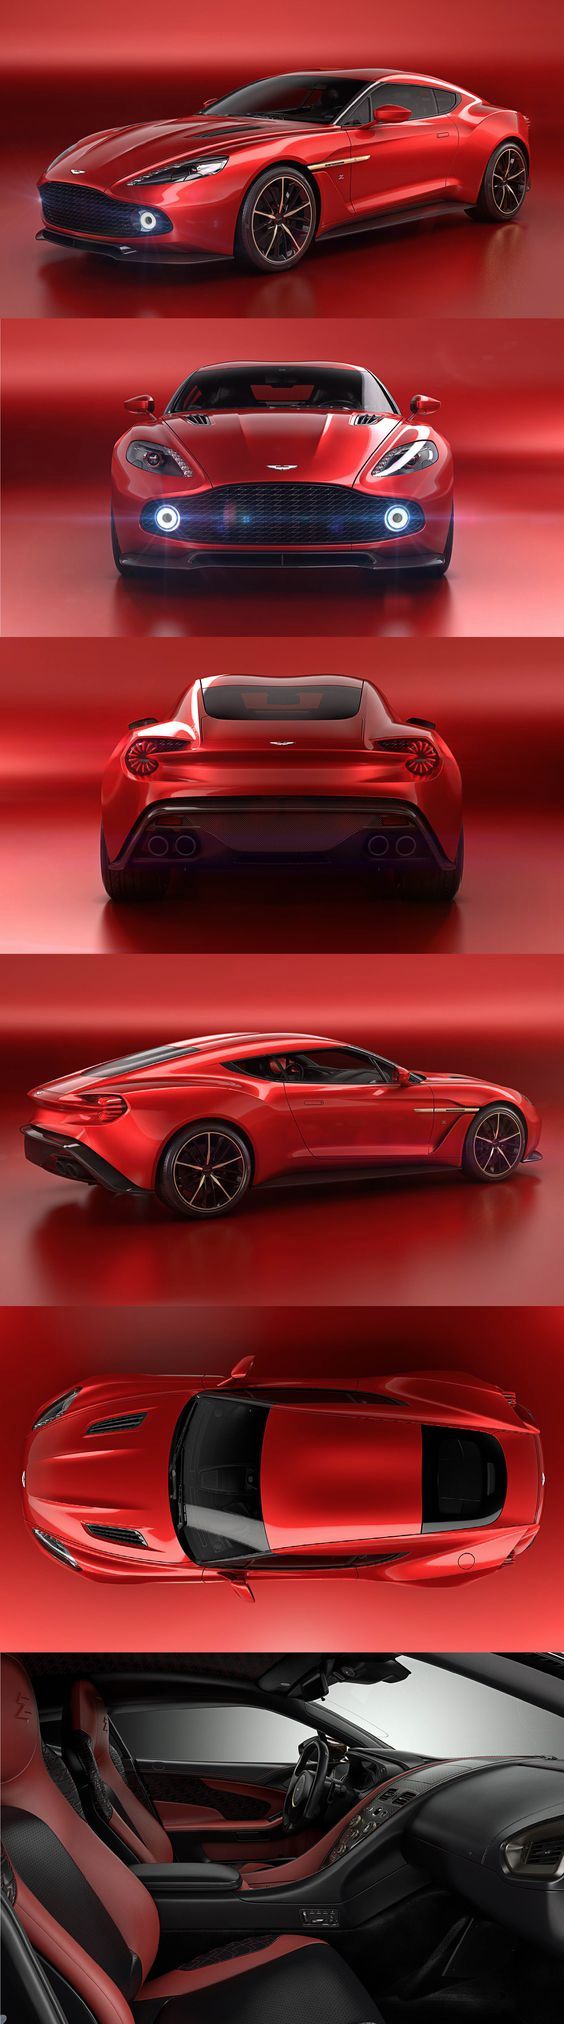 MUST SEE “ 2017 Aston Martin Vanquish Zagato”, 2017 Concept Car Photos and Images, 2017 Cars